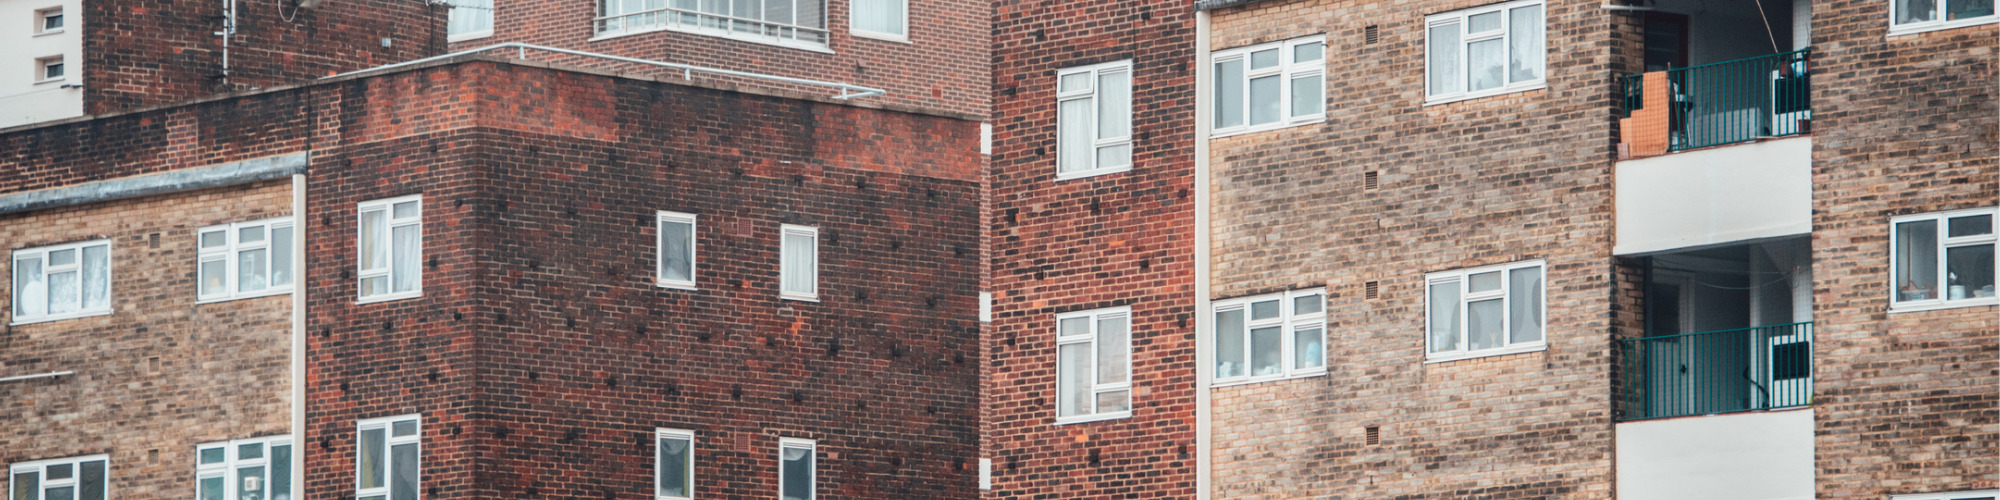 Social Housing & Shared Ownership - A Roundup for Conveyancers